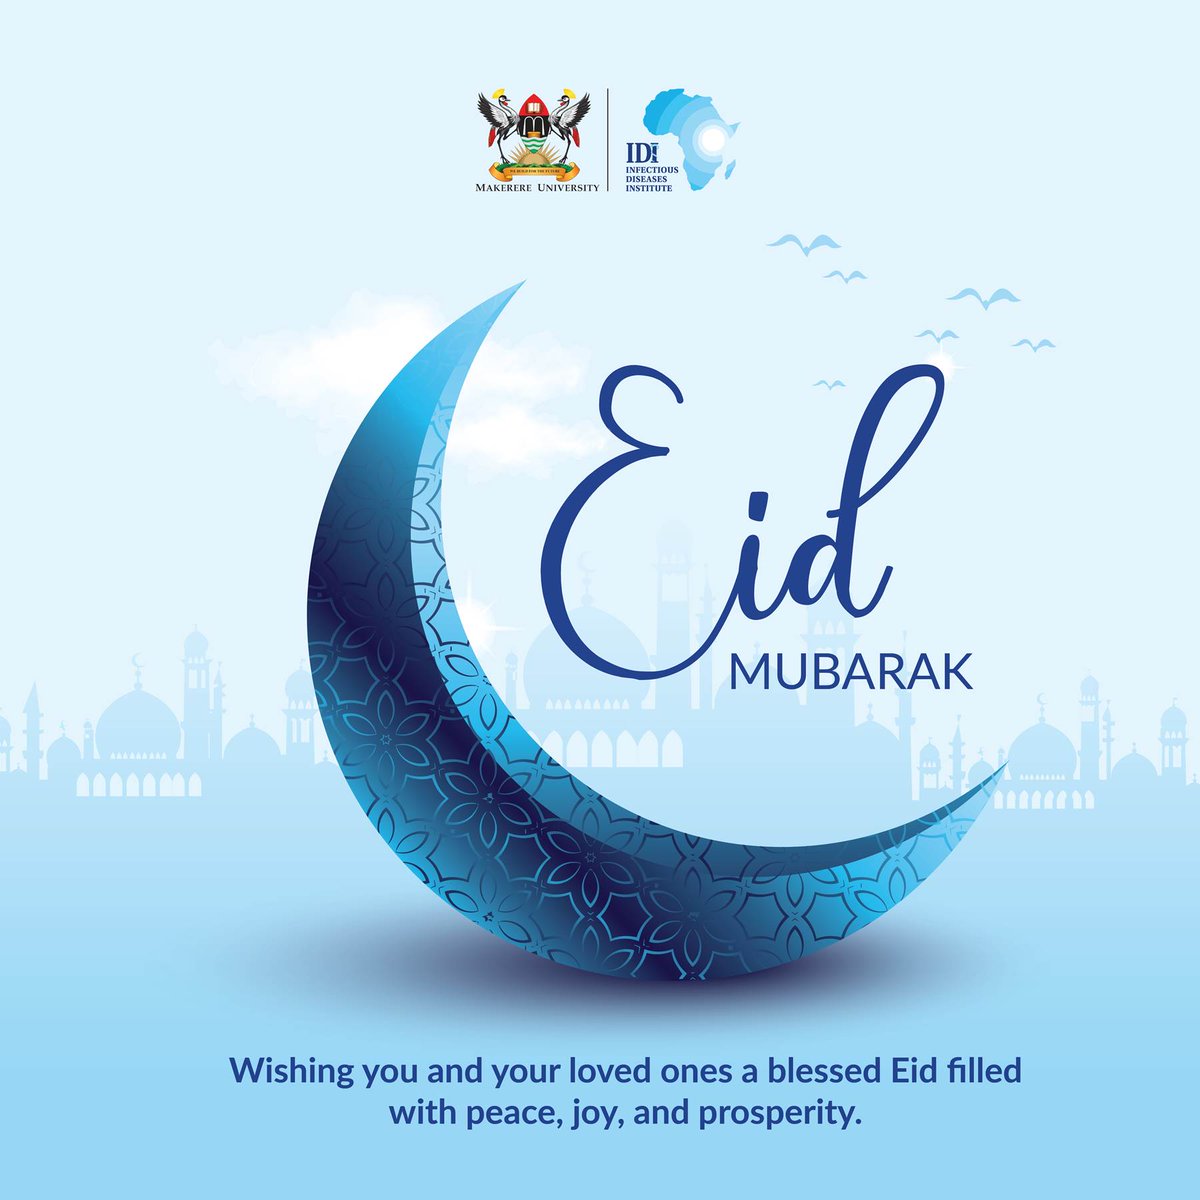 Wishing you a blessed Eid filled with cherished moments and beautiful memories. May this Eid bring you closer to your loved ones and deepen the bonds of friendship and brotherhood. Eid Mubarak!